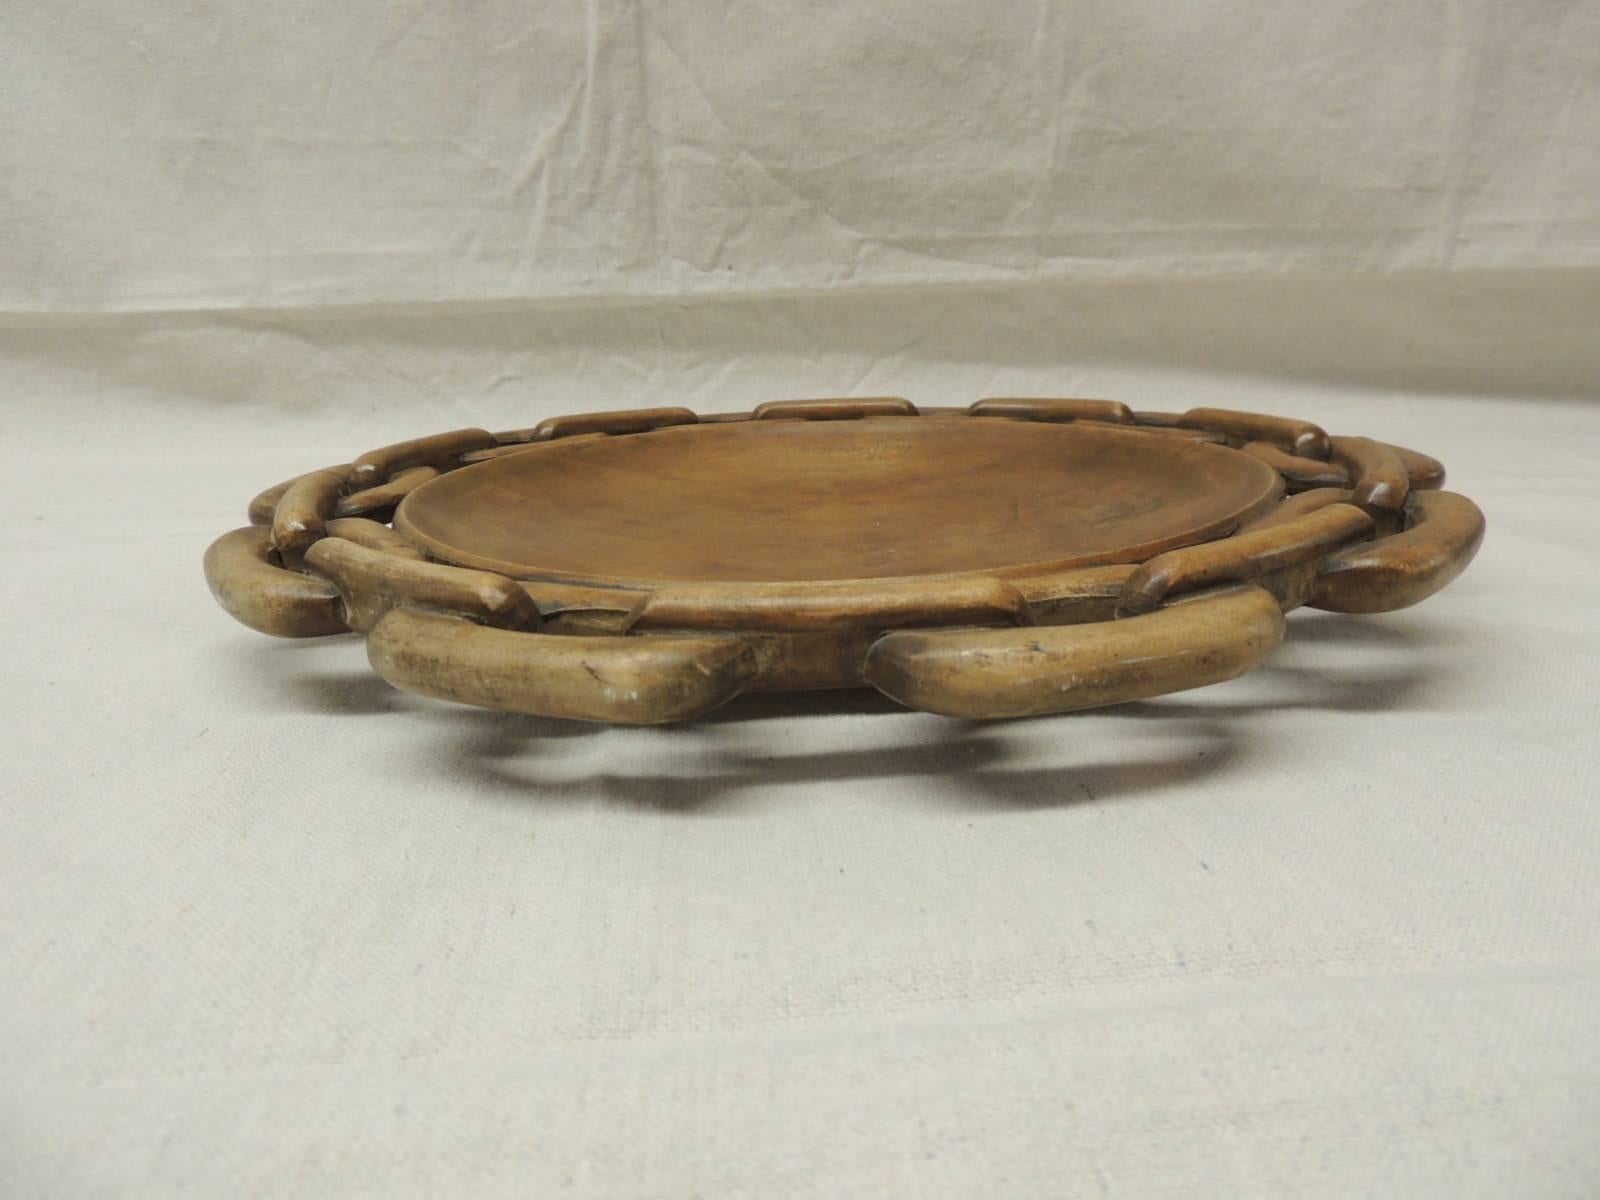 Hollywood Regency Sculptural Hand-Carved Wood Tray with Links Border